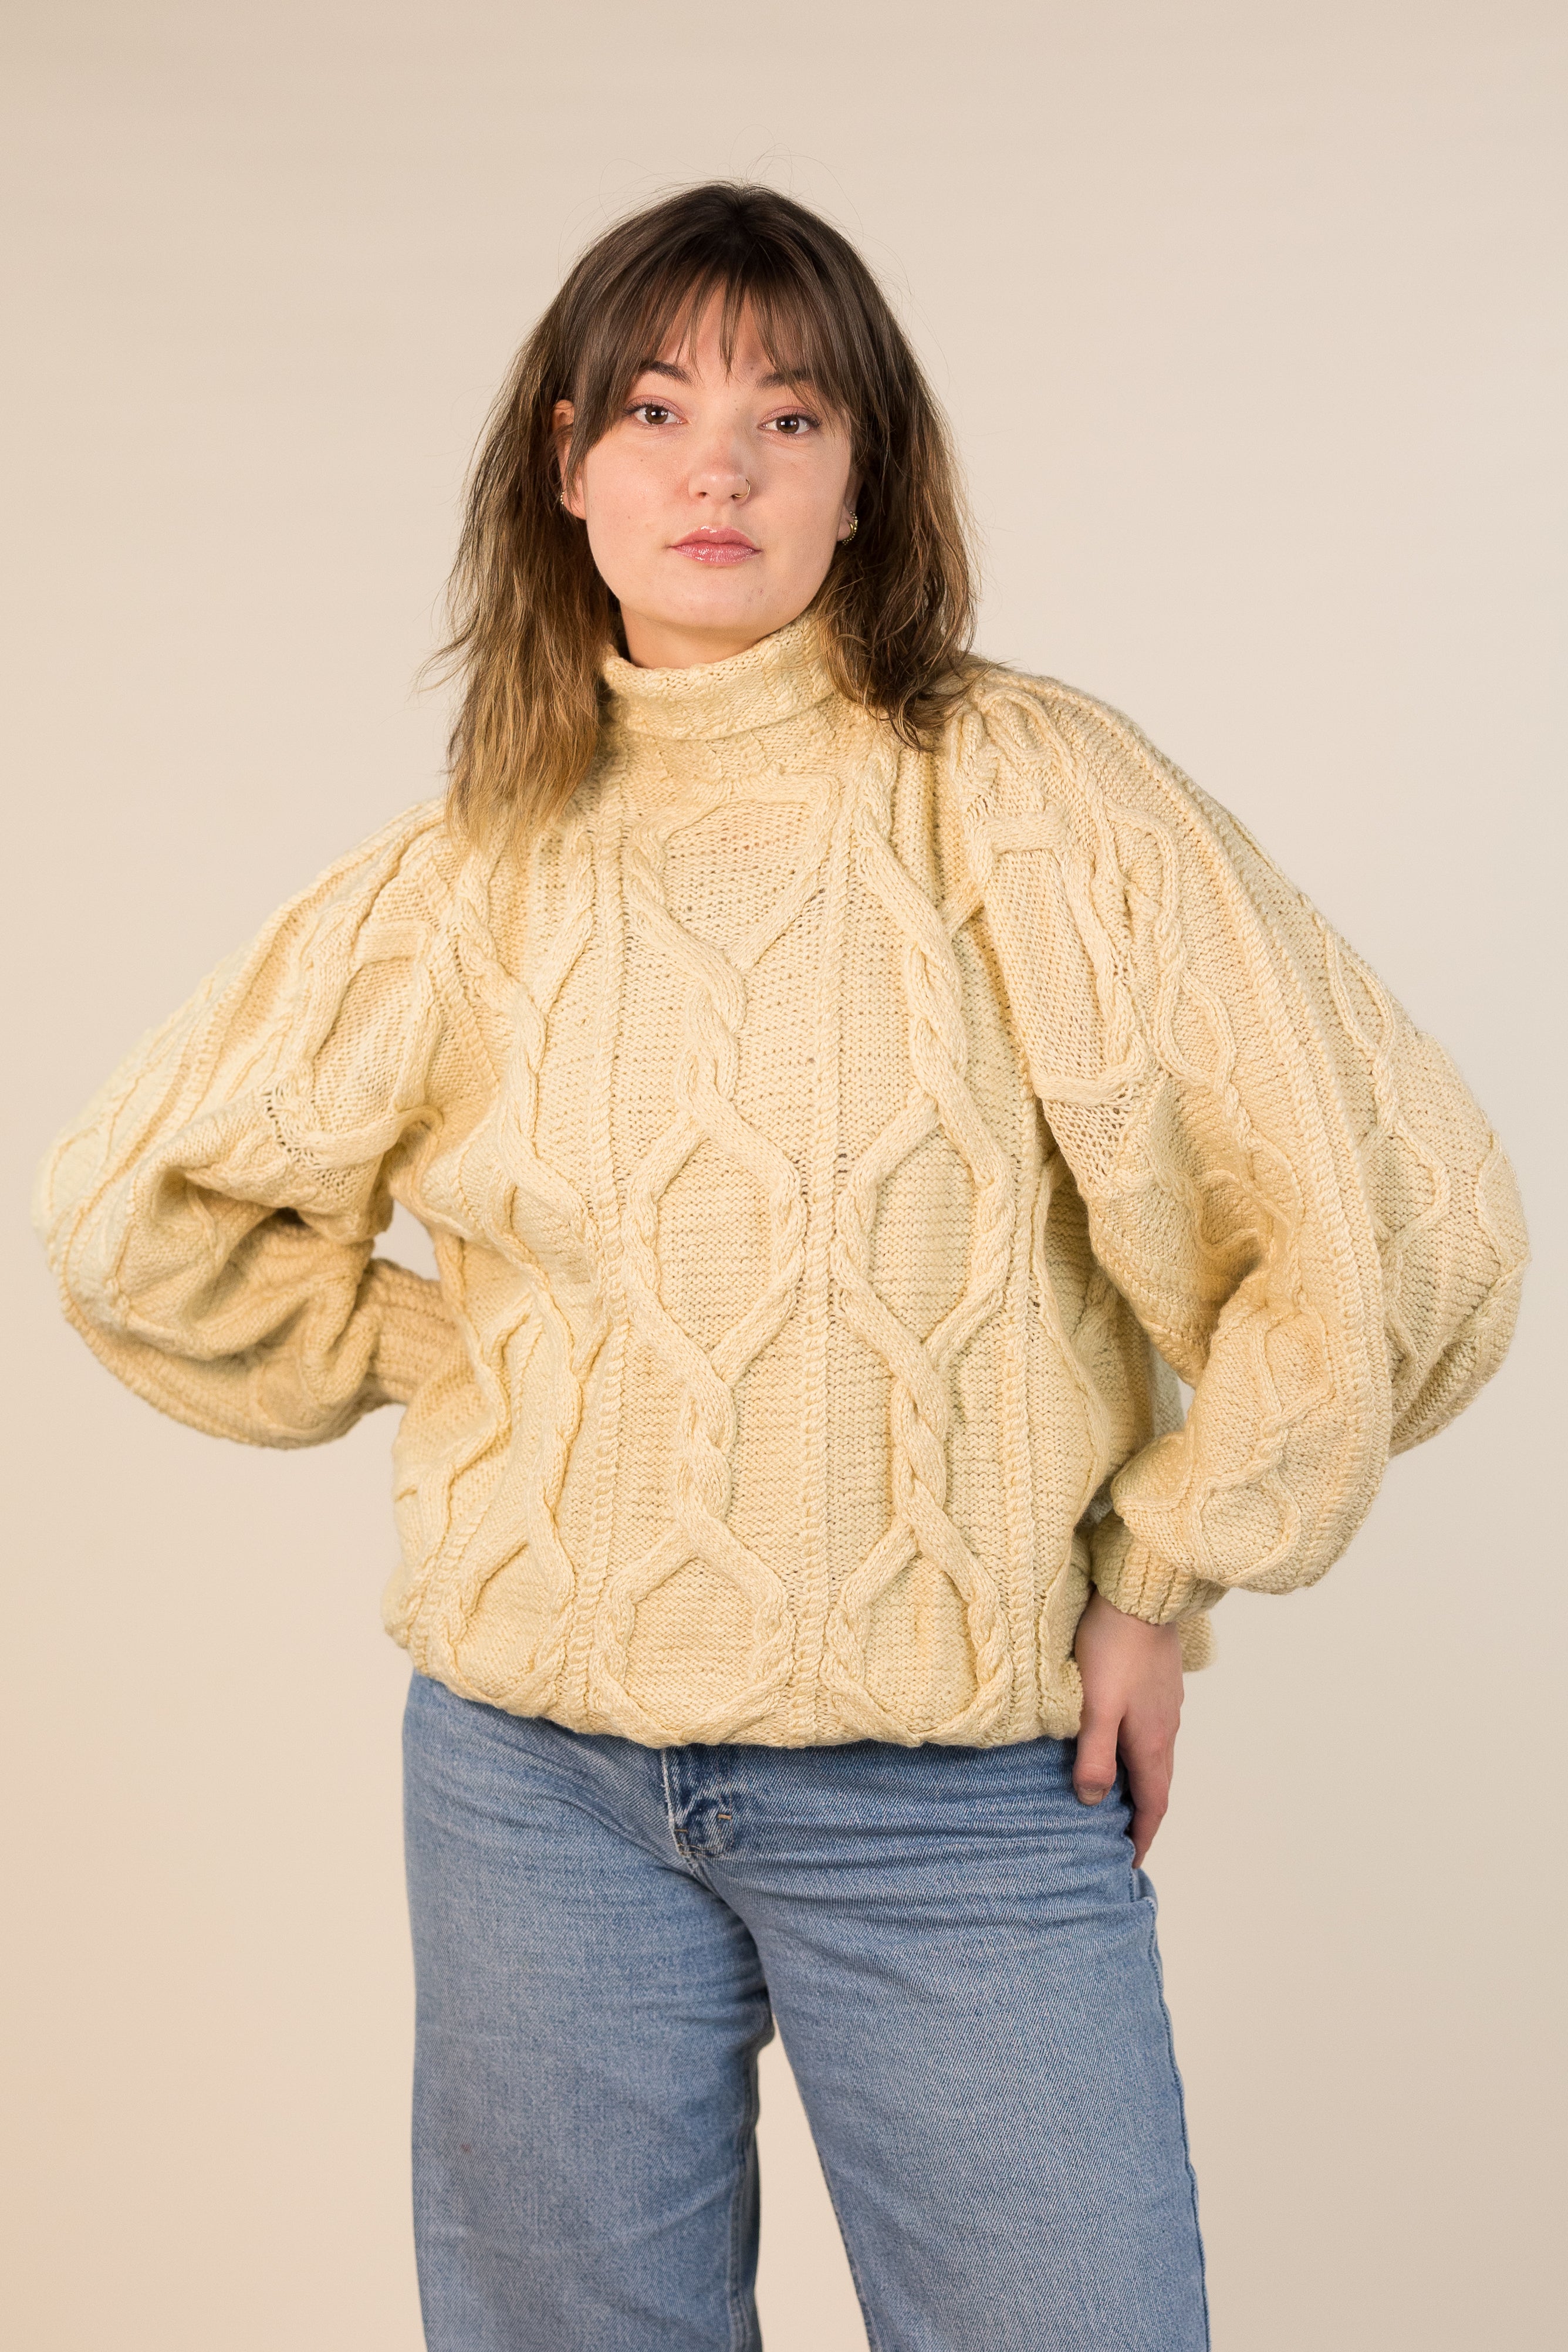 Handmade Cable Knit Jumper